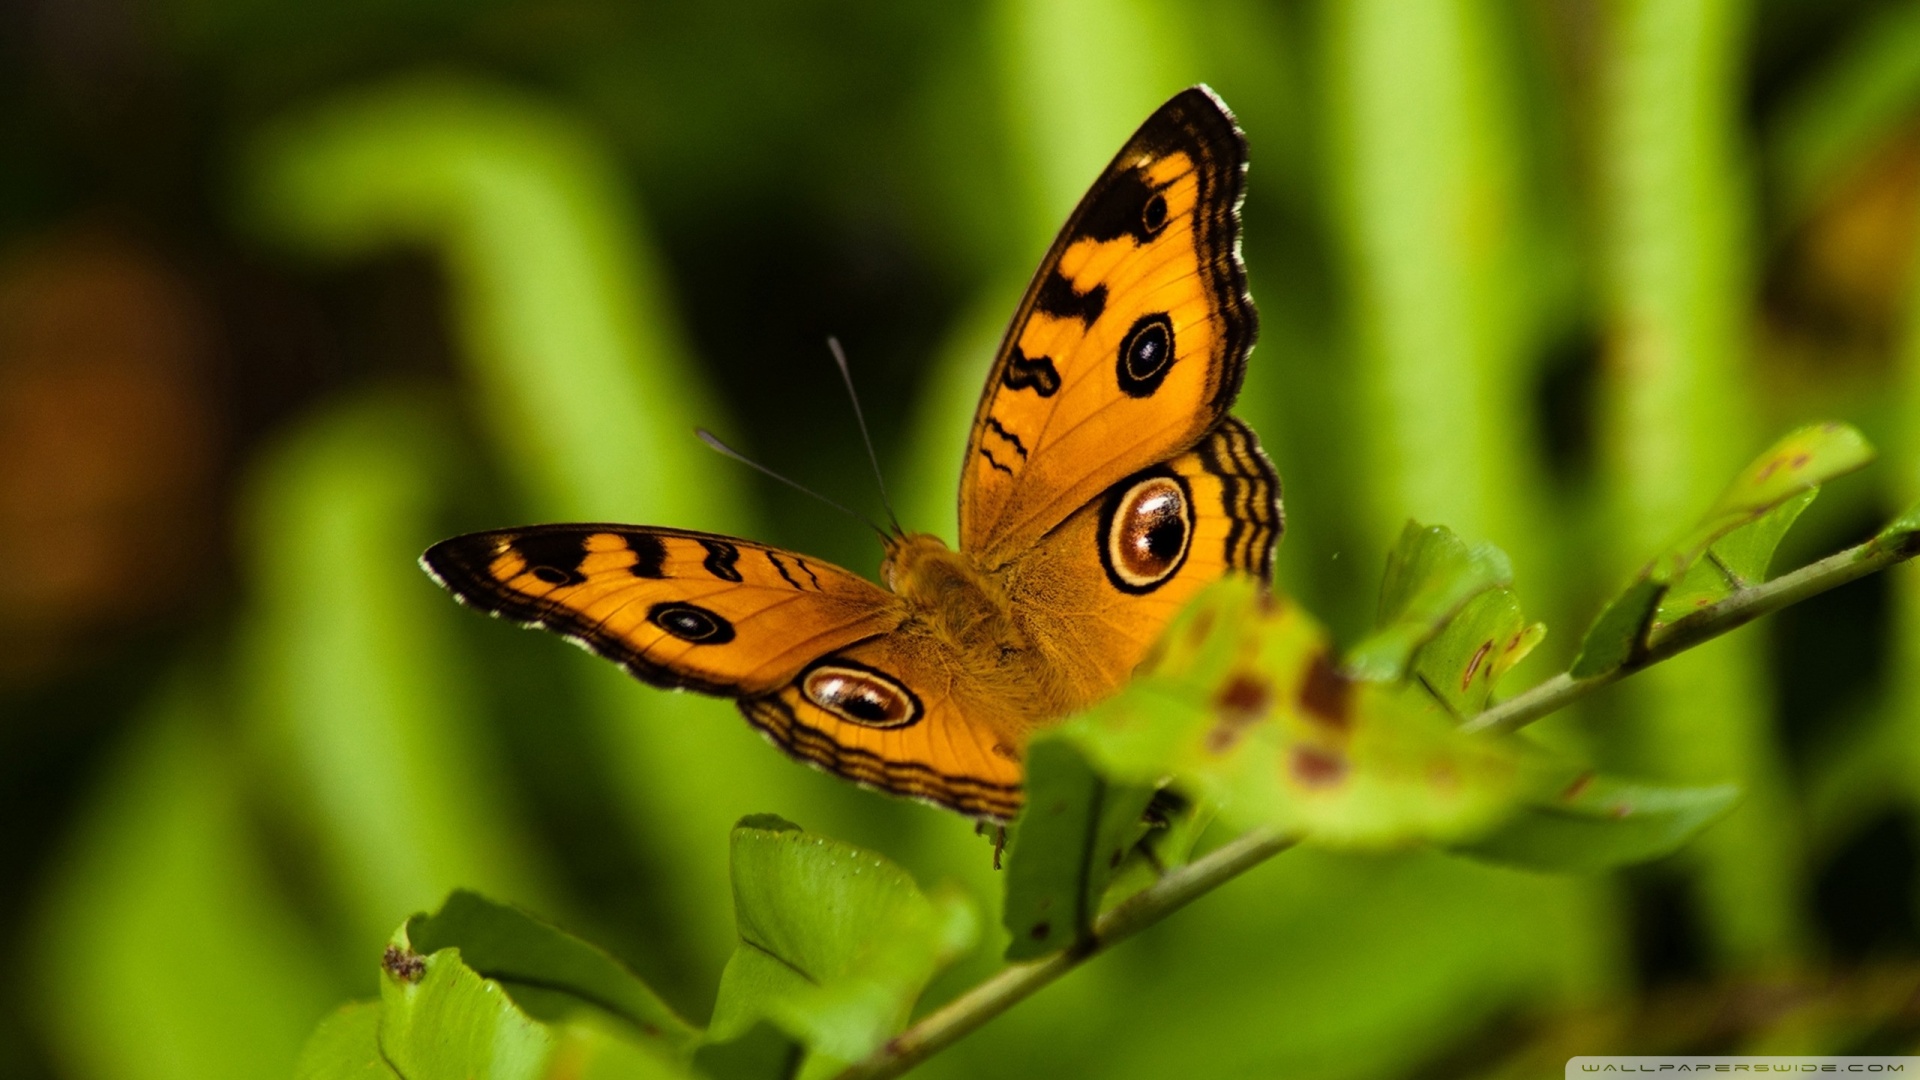 Orange And Black Butterfly Wallpaper - Cute Pictures Of Nature - HD Wallpaper 